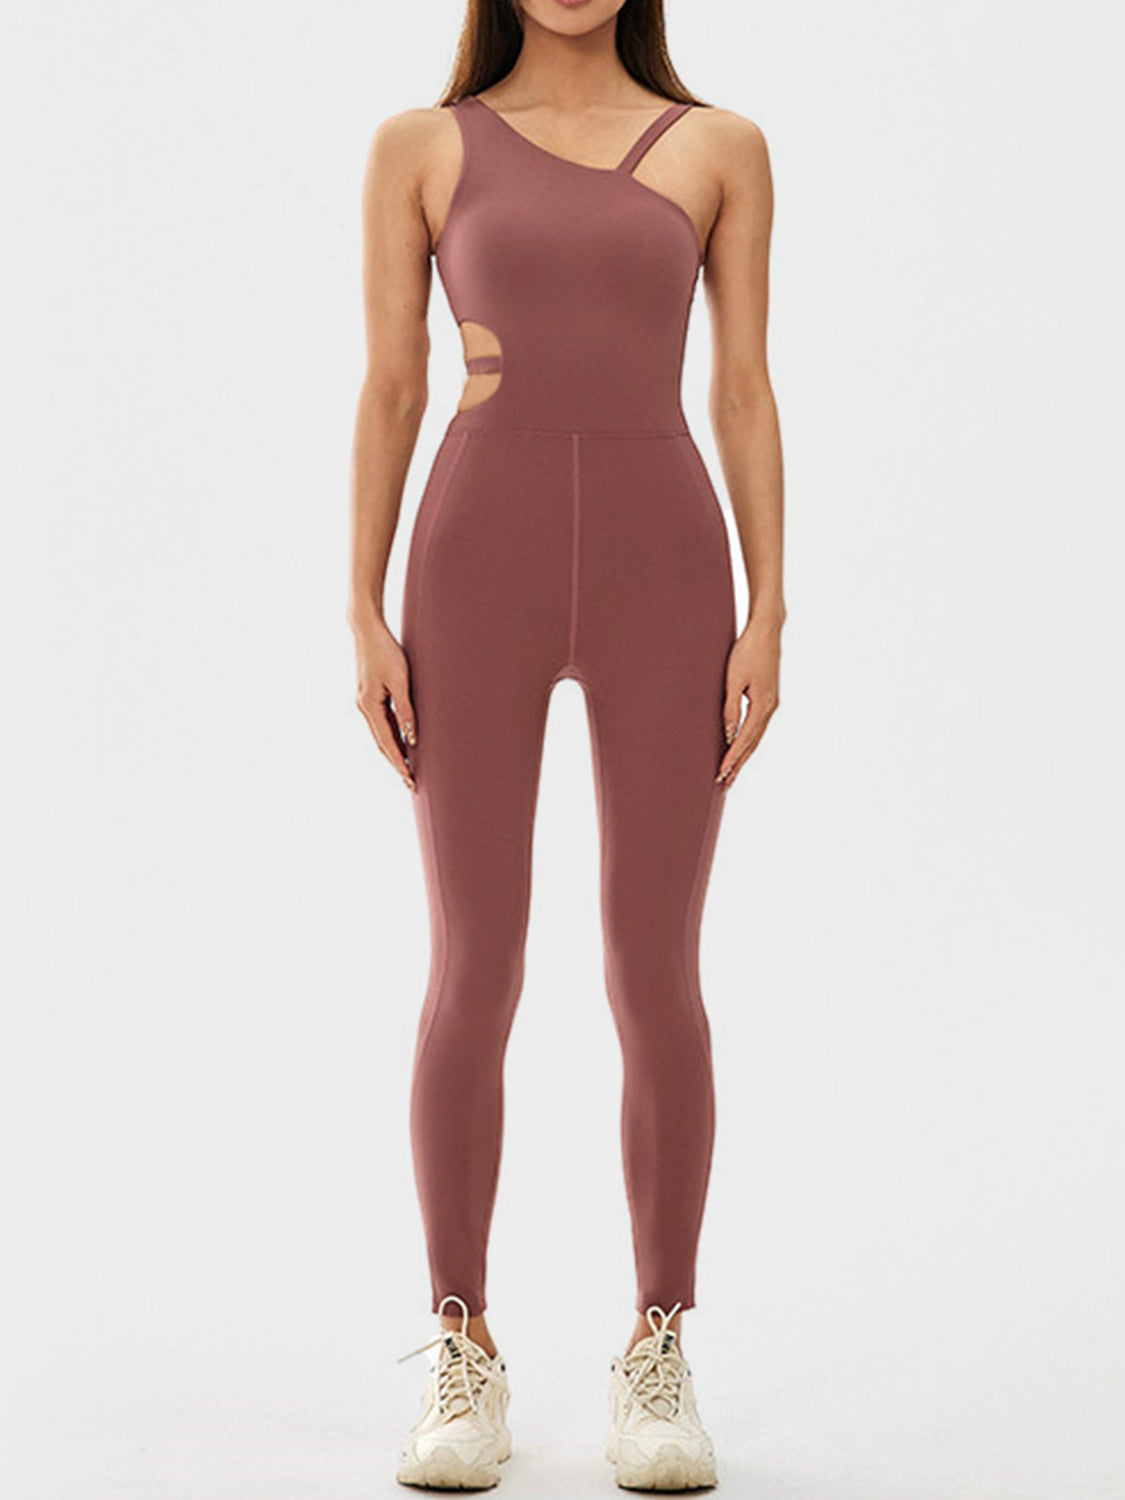 jumpsuits, workout clothes, gym clothes, activewear rompers, activewear jumpsuits, cute workout clothes, cute sports clothes, clothes for exercising, comfy clothes, comfortable clothes, designer clothes, fashion 2024, casual day clothes, cheap clothes, luxury yoga fashion, popular fashion, tiktok fashion, kesley fahsion, sexy workout clothes, gym fashion, gym outfit ideas, influencer brands, workout brands, sports brands, birthday gifts, fashion gifts, gift ideas, mothers day gifts